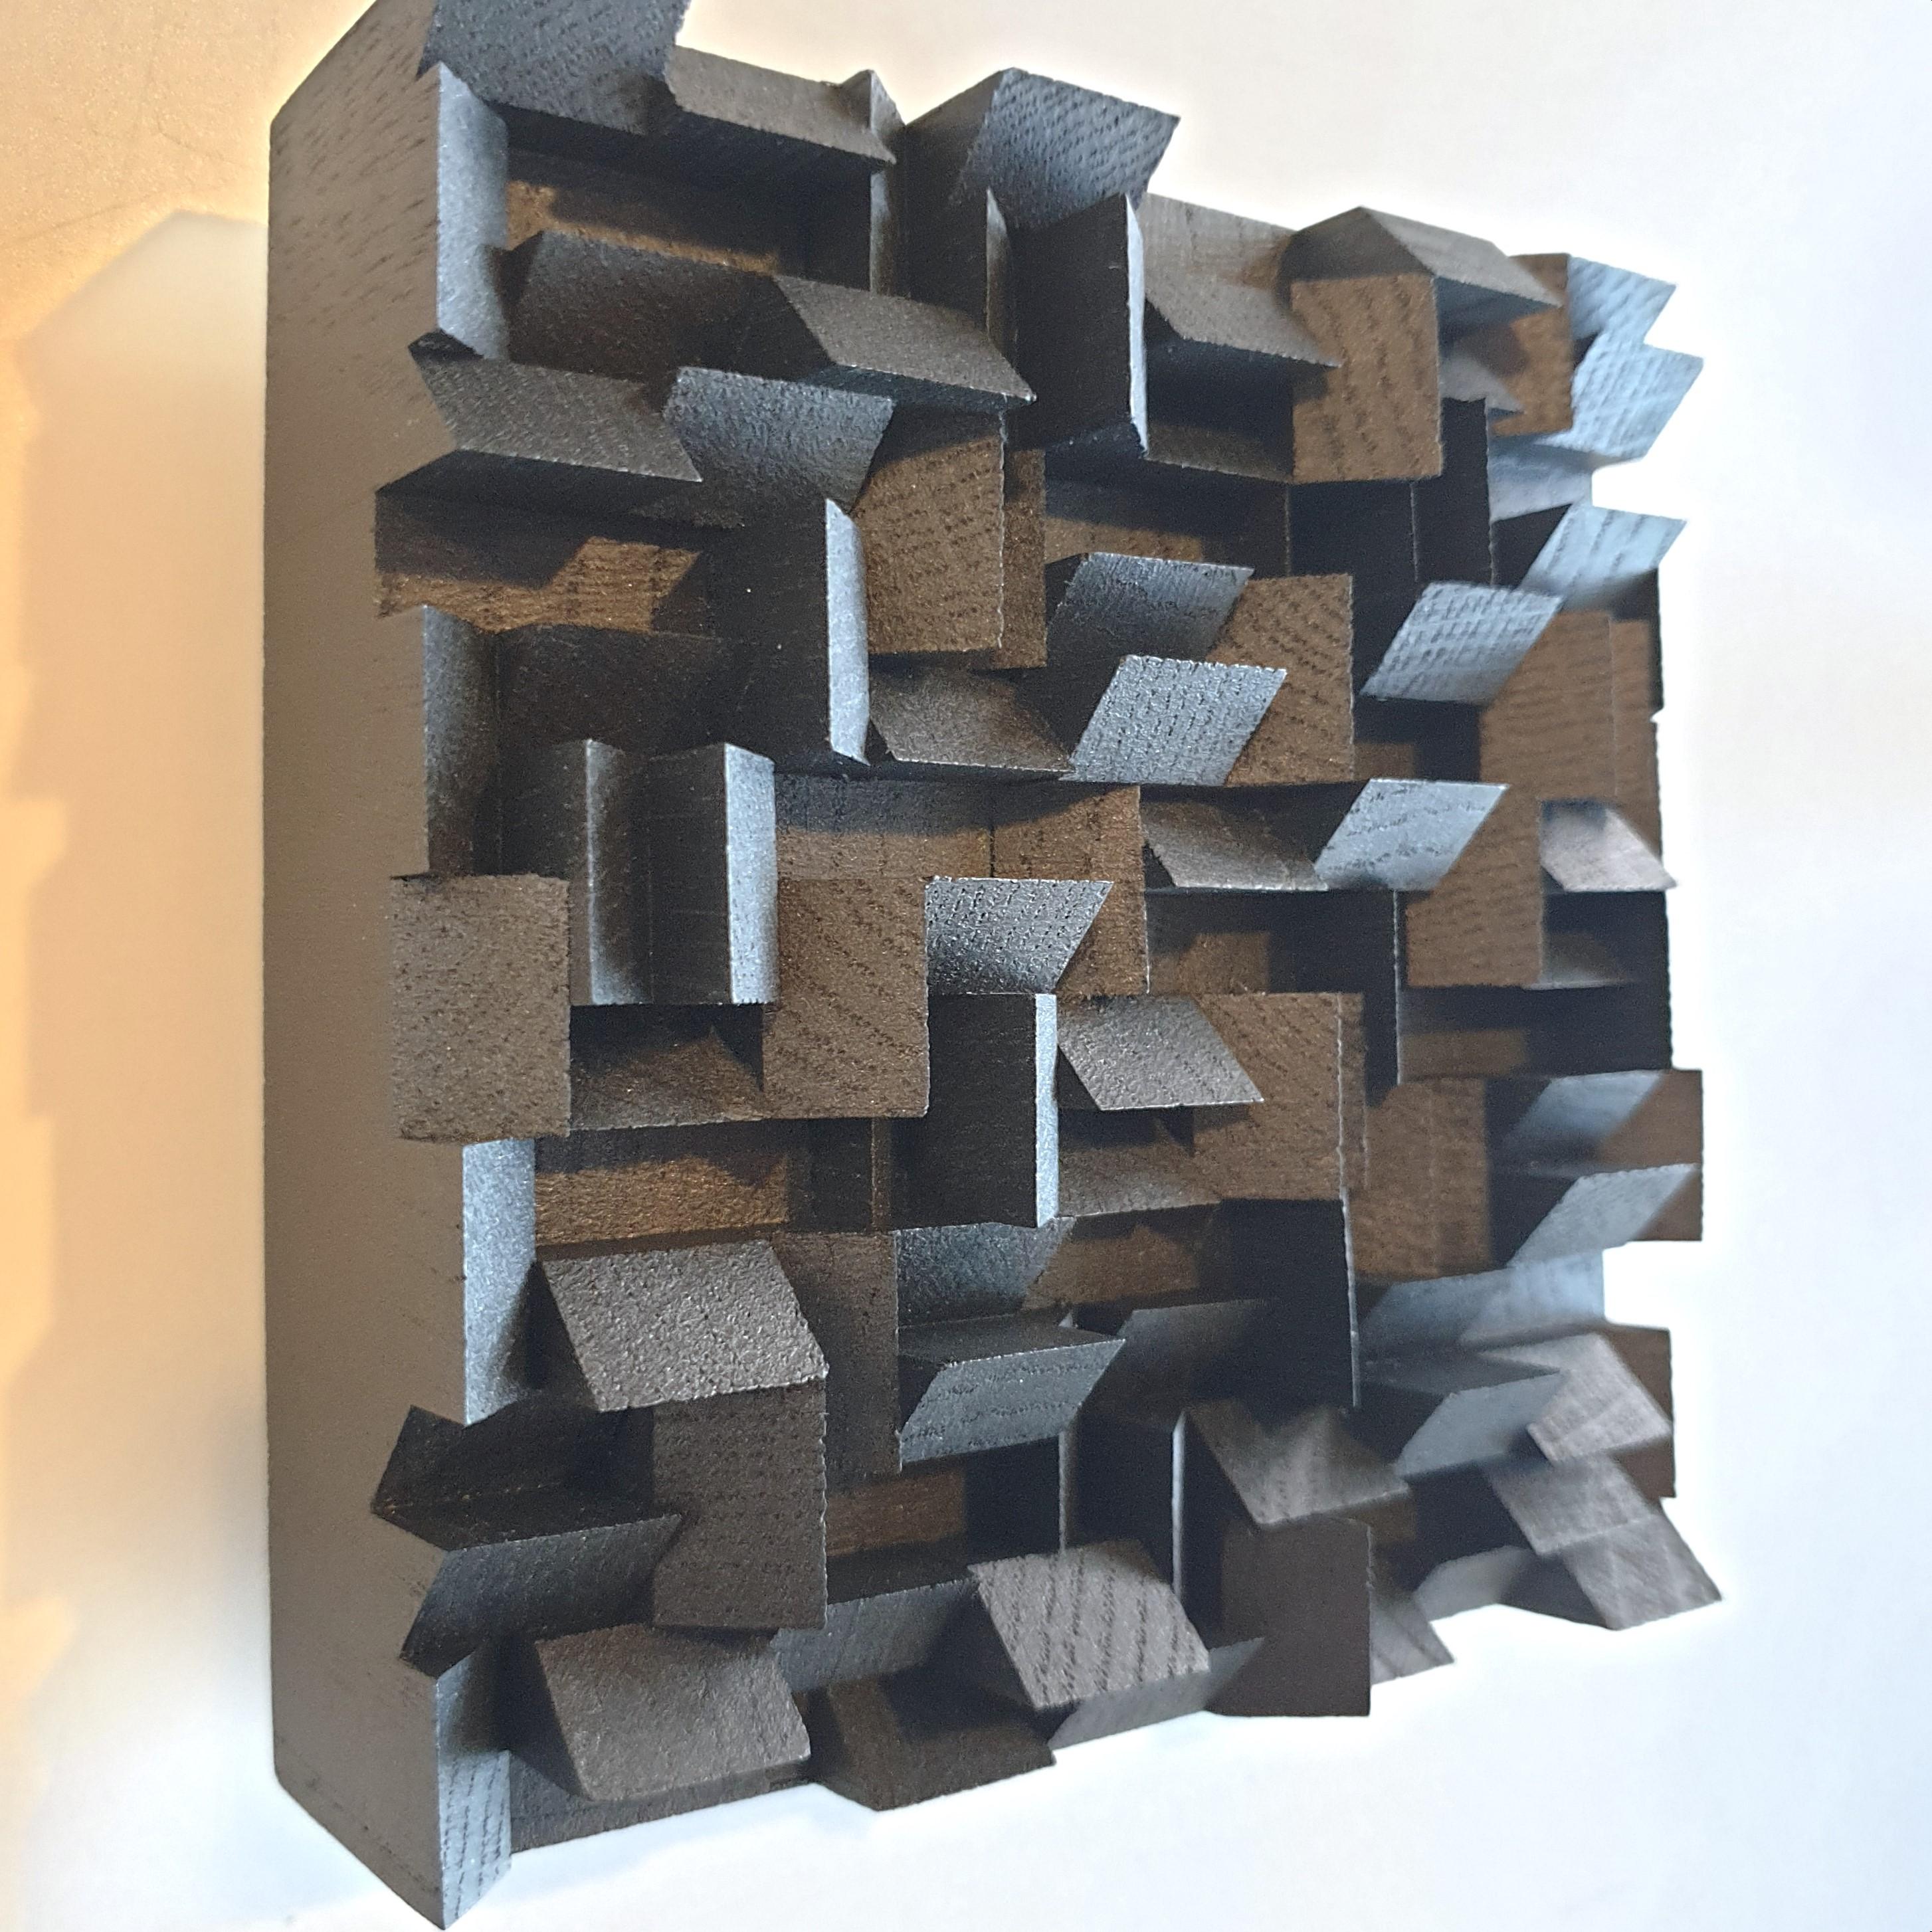 This Variation triptyque wall sculpture consists of three different small size contemporary modern abstract wall sculptures by French-Dutch artist Olivier Julia. These wall sculptures are each made individually from carefully cut, glued and sanded